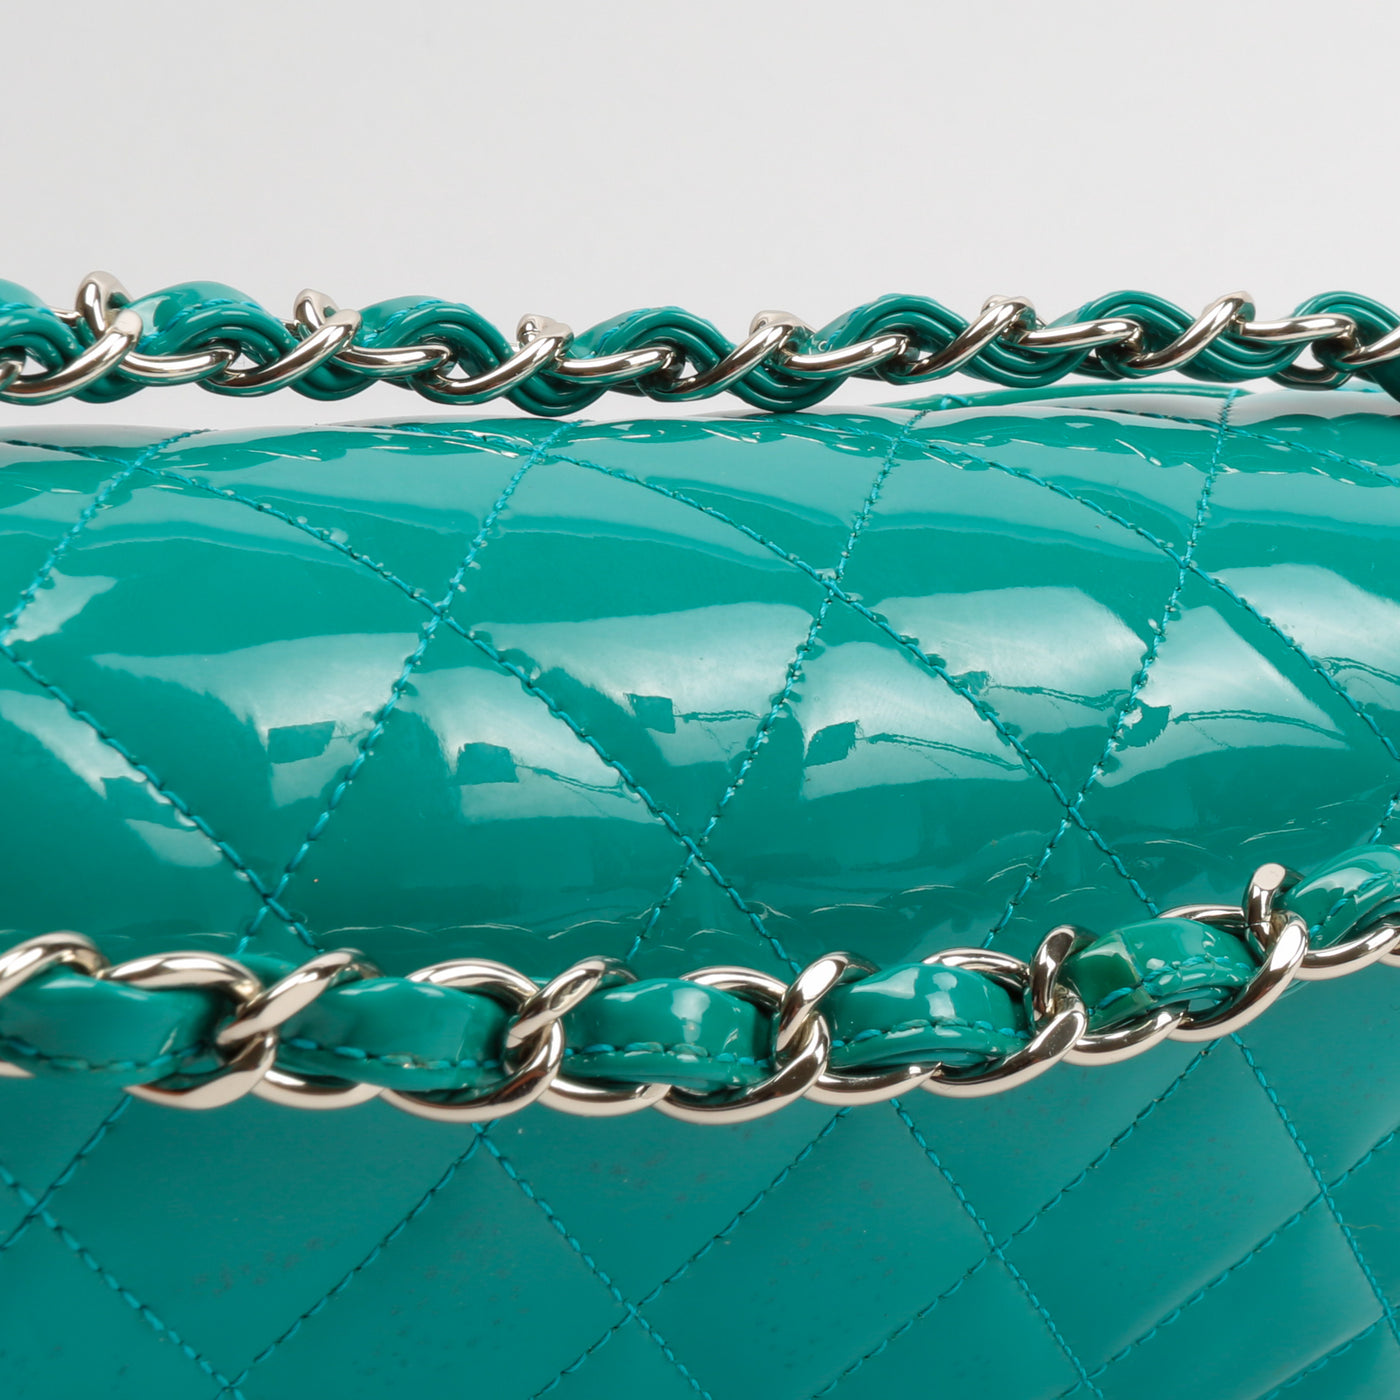 CHANEL Patent Classic Double Flap - Turquoise